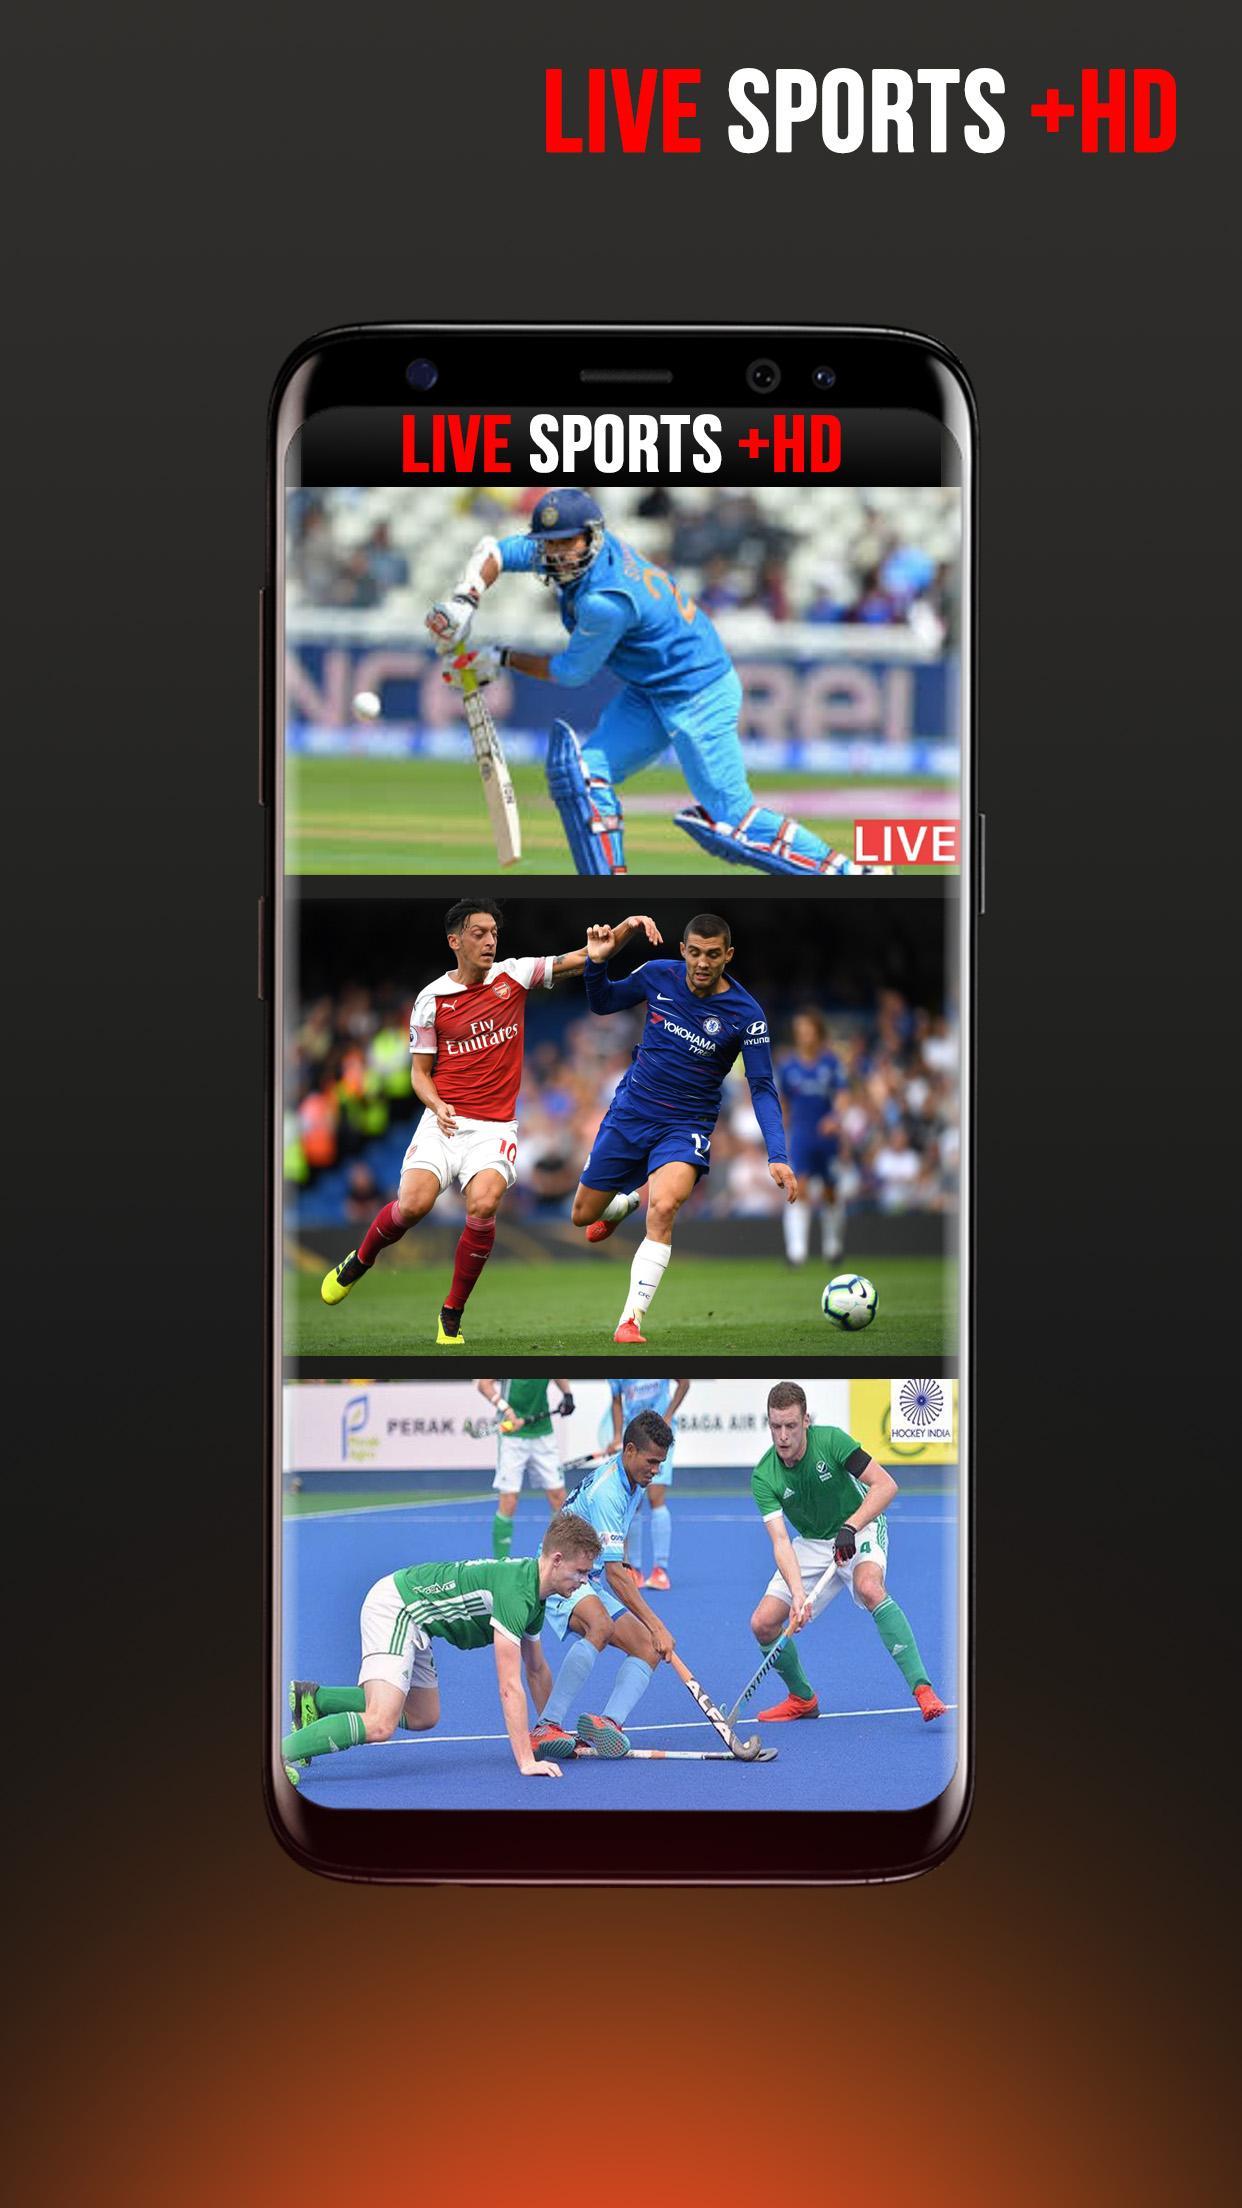 Live Sports Plus HD for Android - APK Download